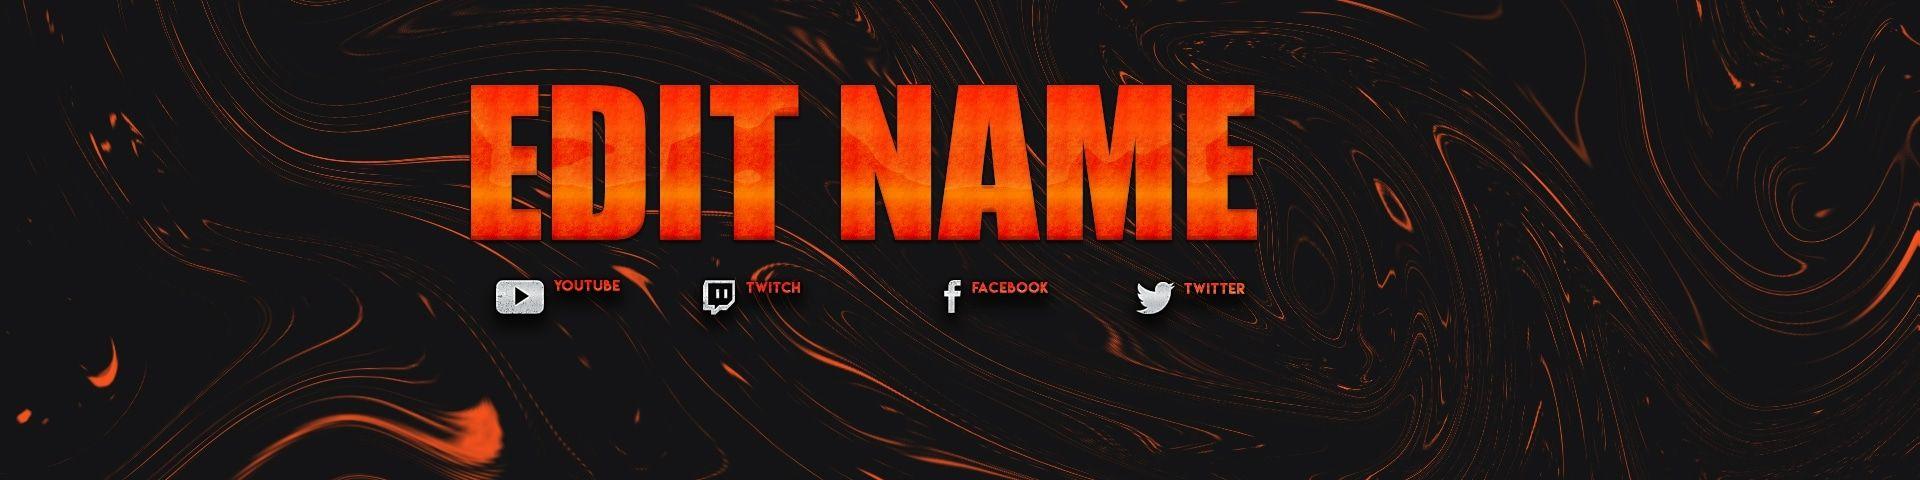 twitch banner maker free